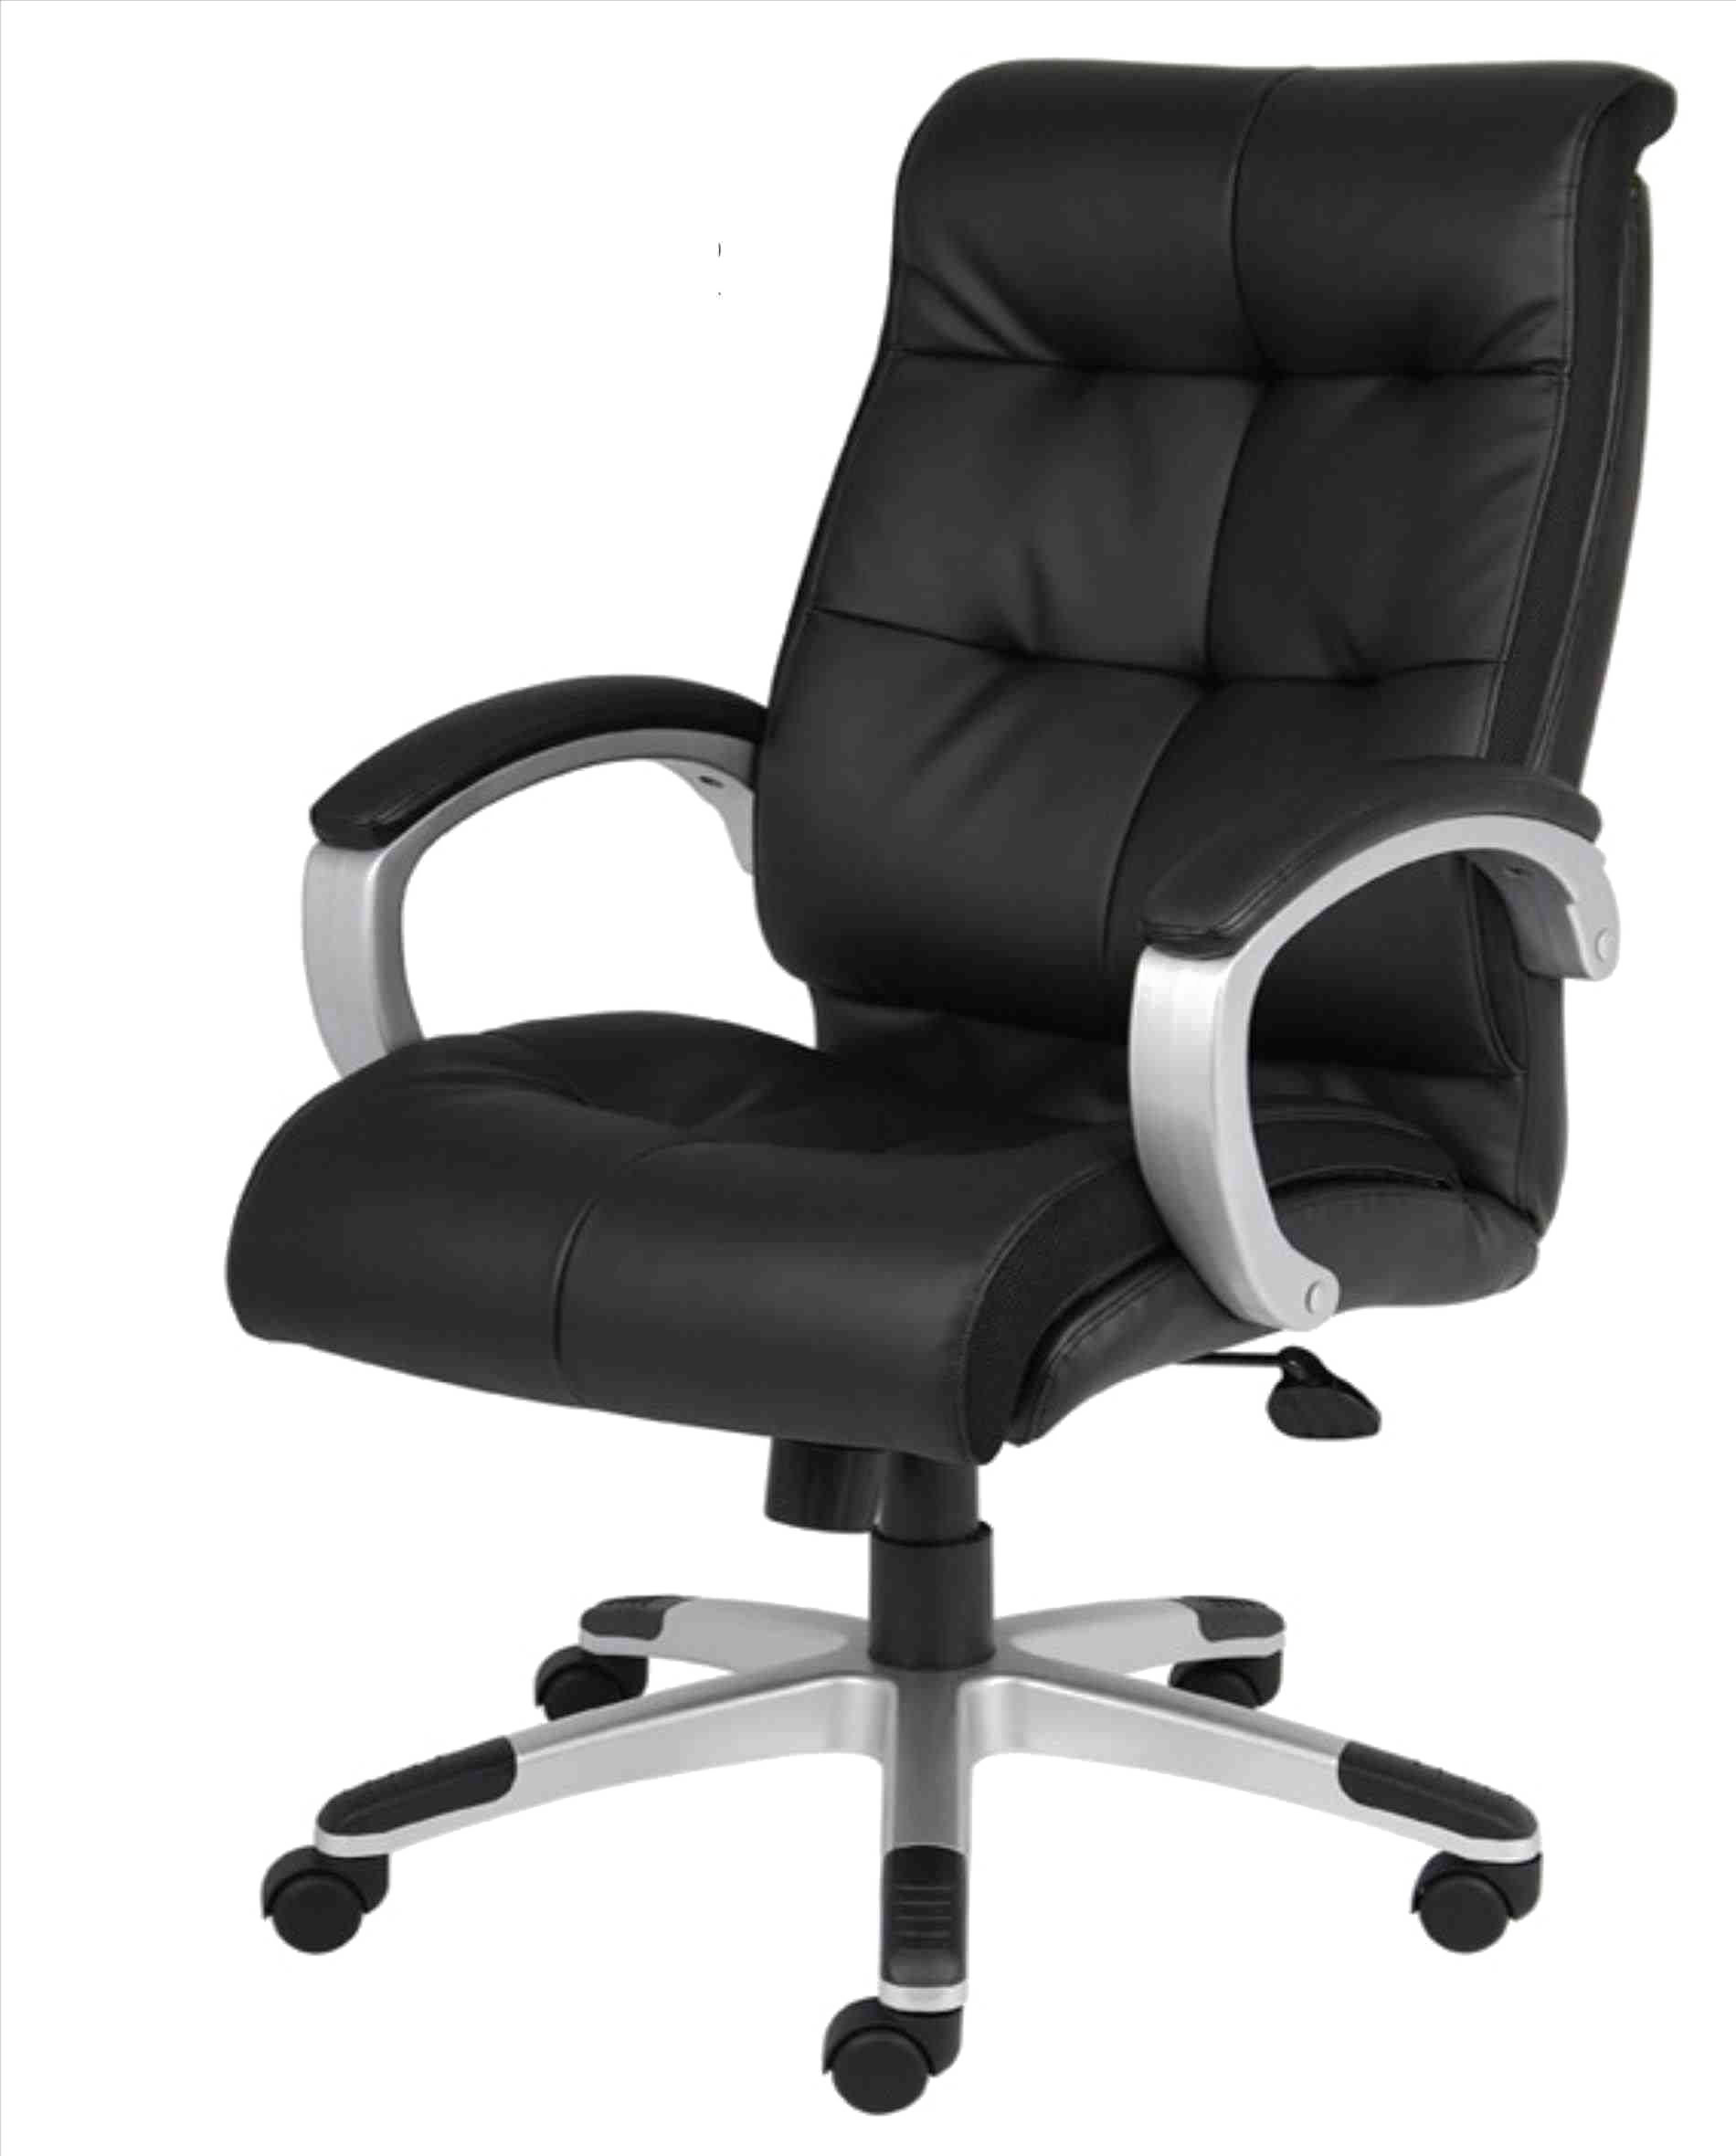 chair-and-table-png-office-chair-png-image-you-can-download-and-vrogue